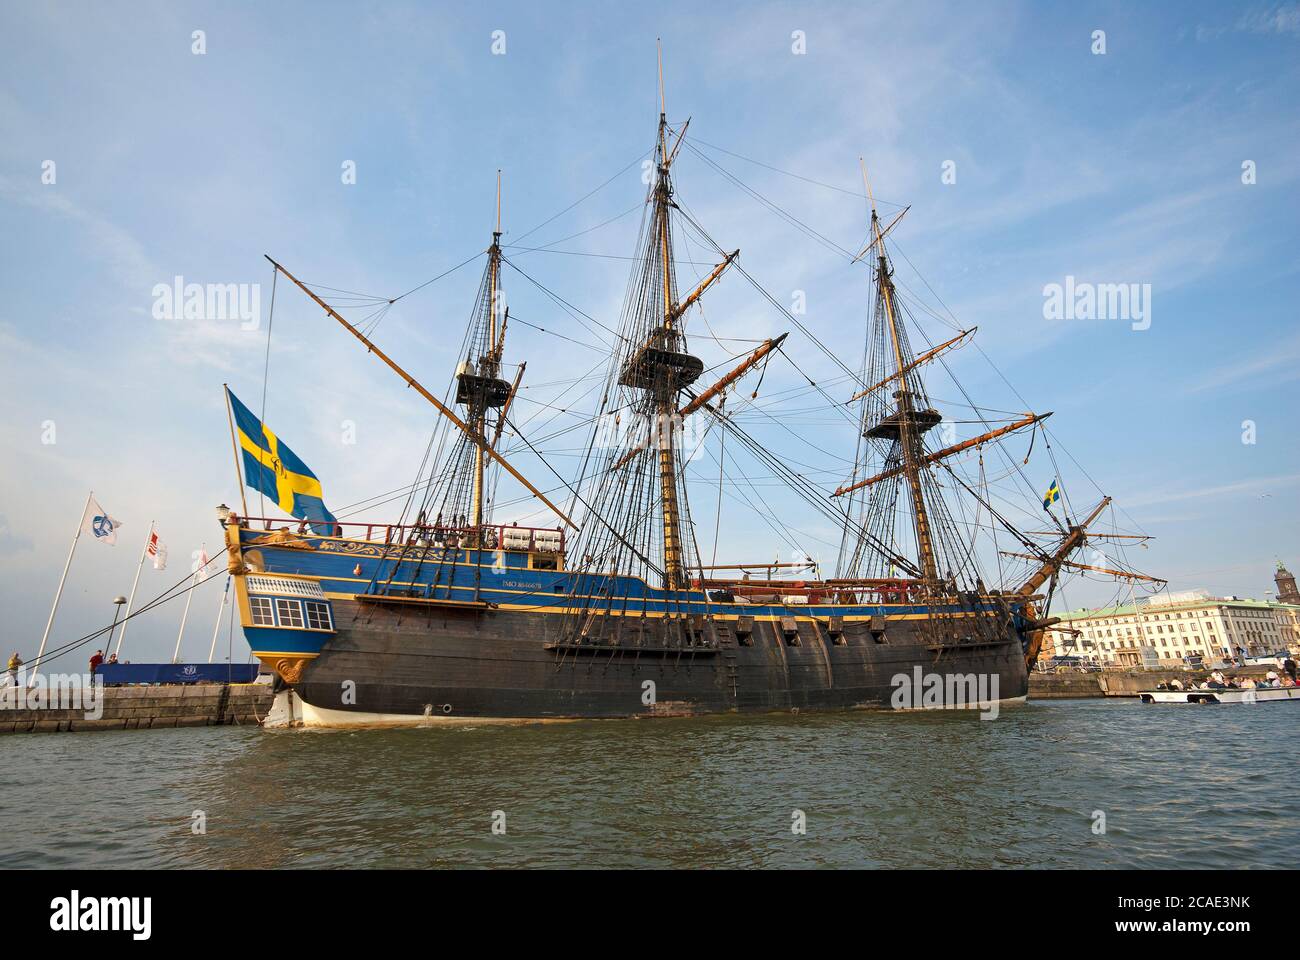 Götheborg III ship, replica of three-masted commercial vessel Götheborg I launched in 1738, Gothenburg harbour, Sweden Stock Photo